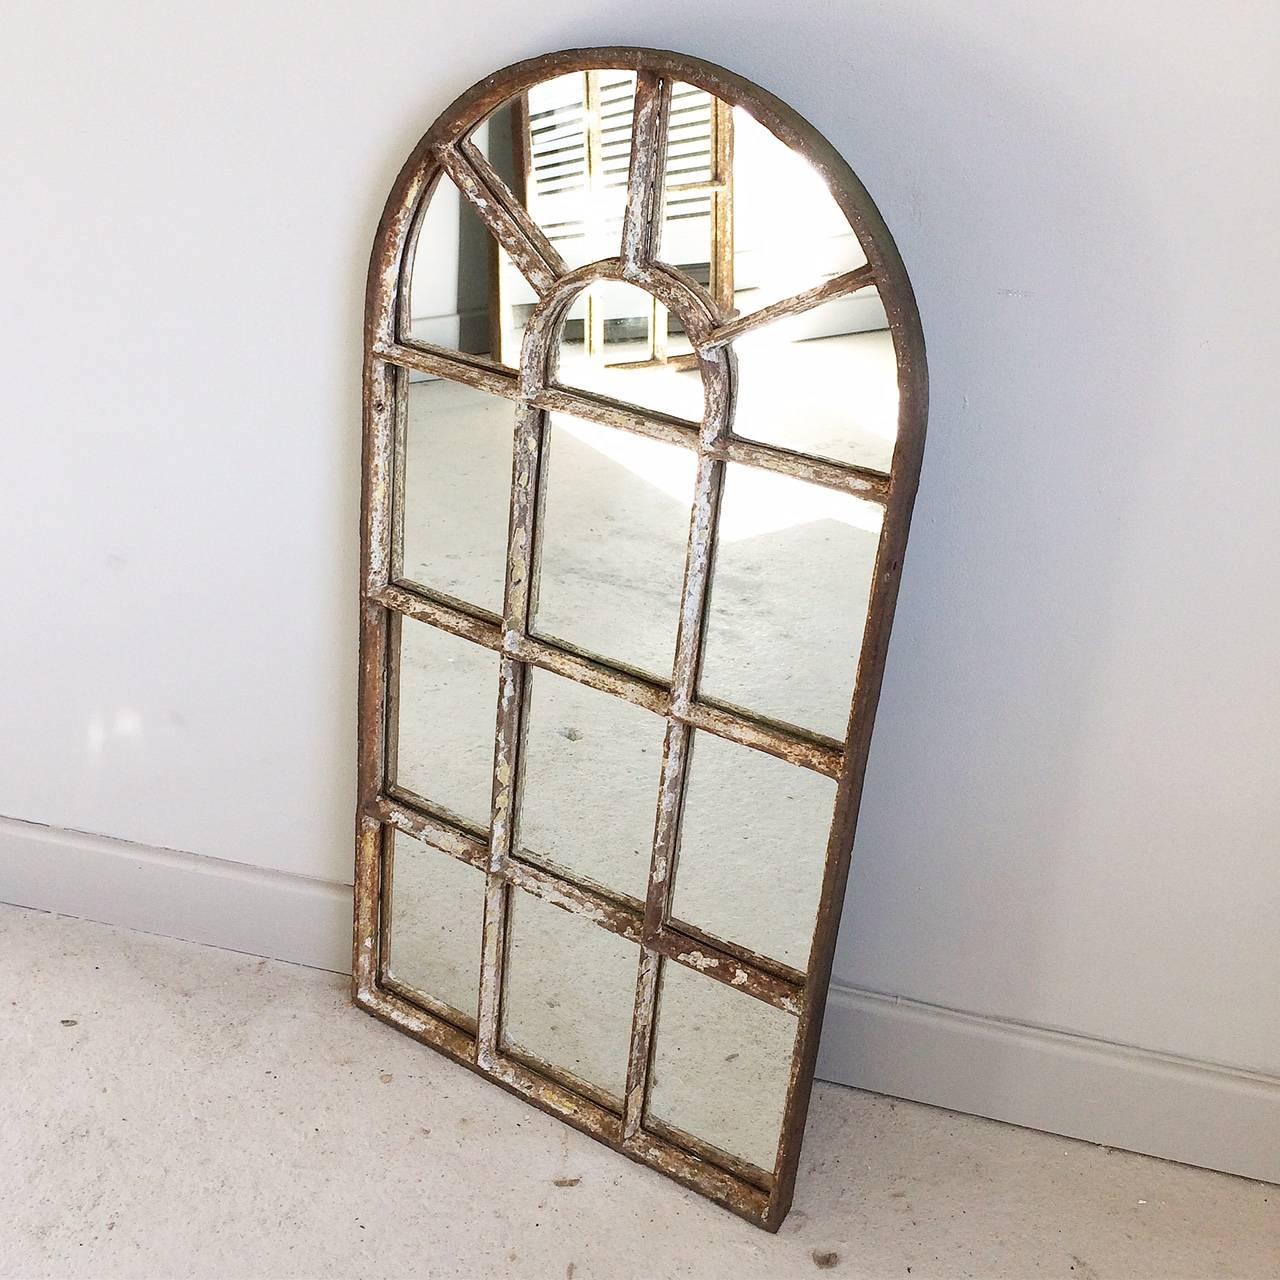 Antique Victorian arched top cast iron window frame converted to a mirror from a Yorkshire railway cottage.